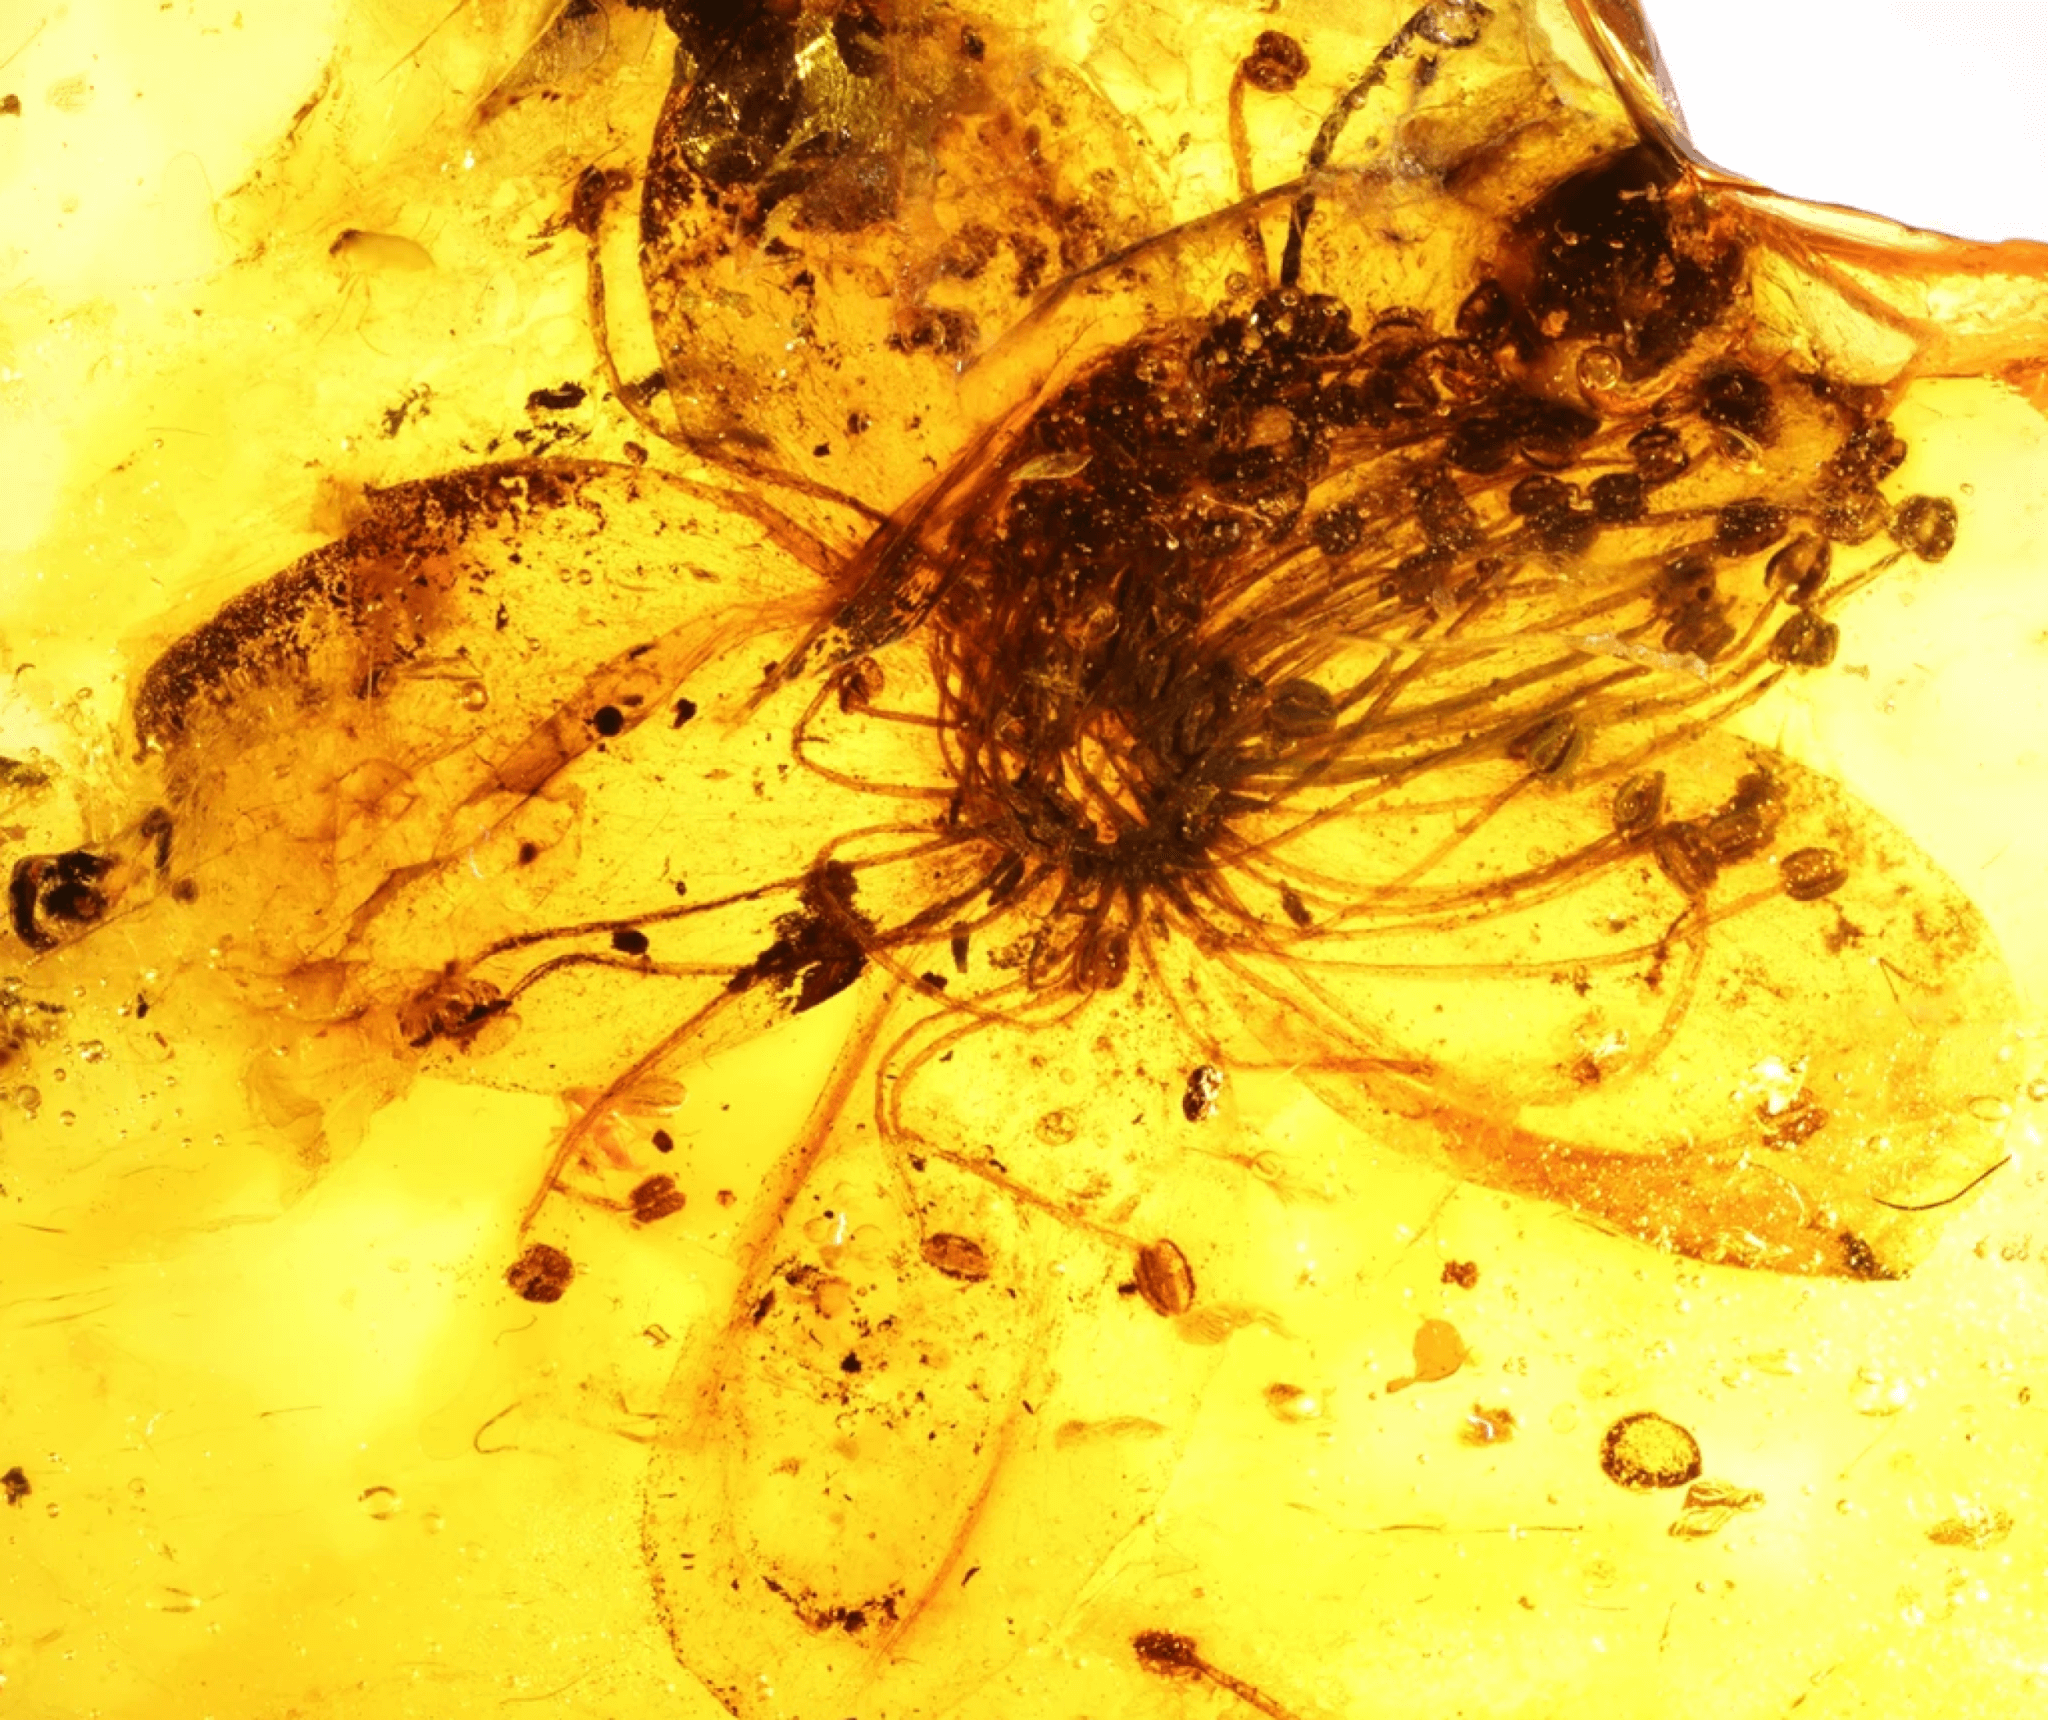 Largest fossilized flower preserved in amber could be nearly 40 million years-old!